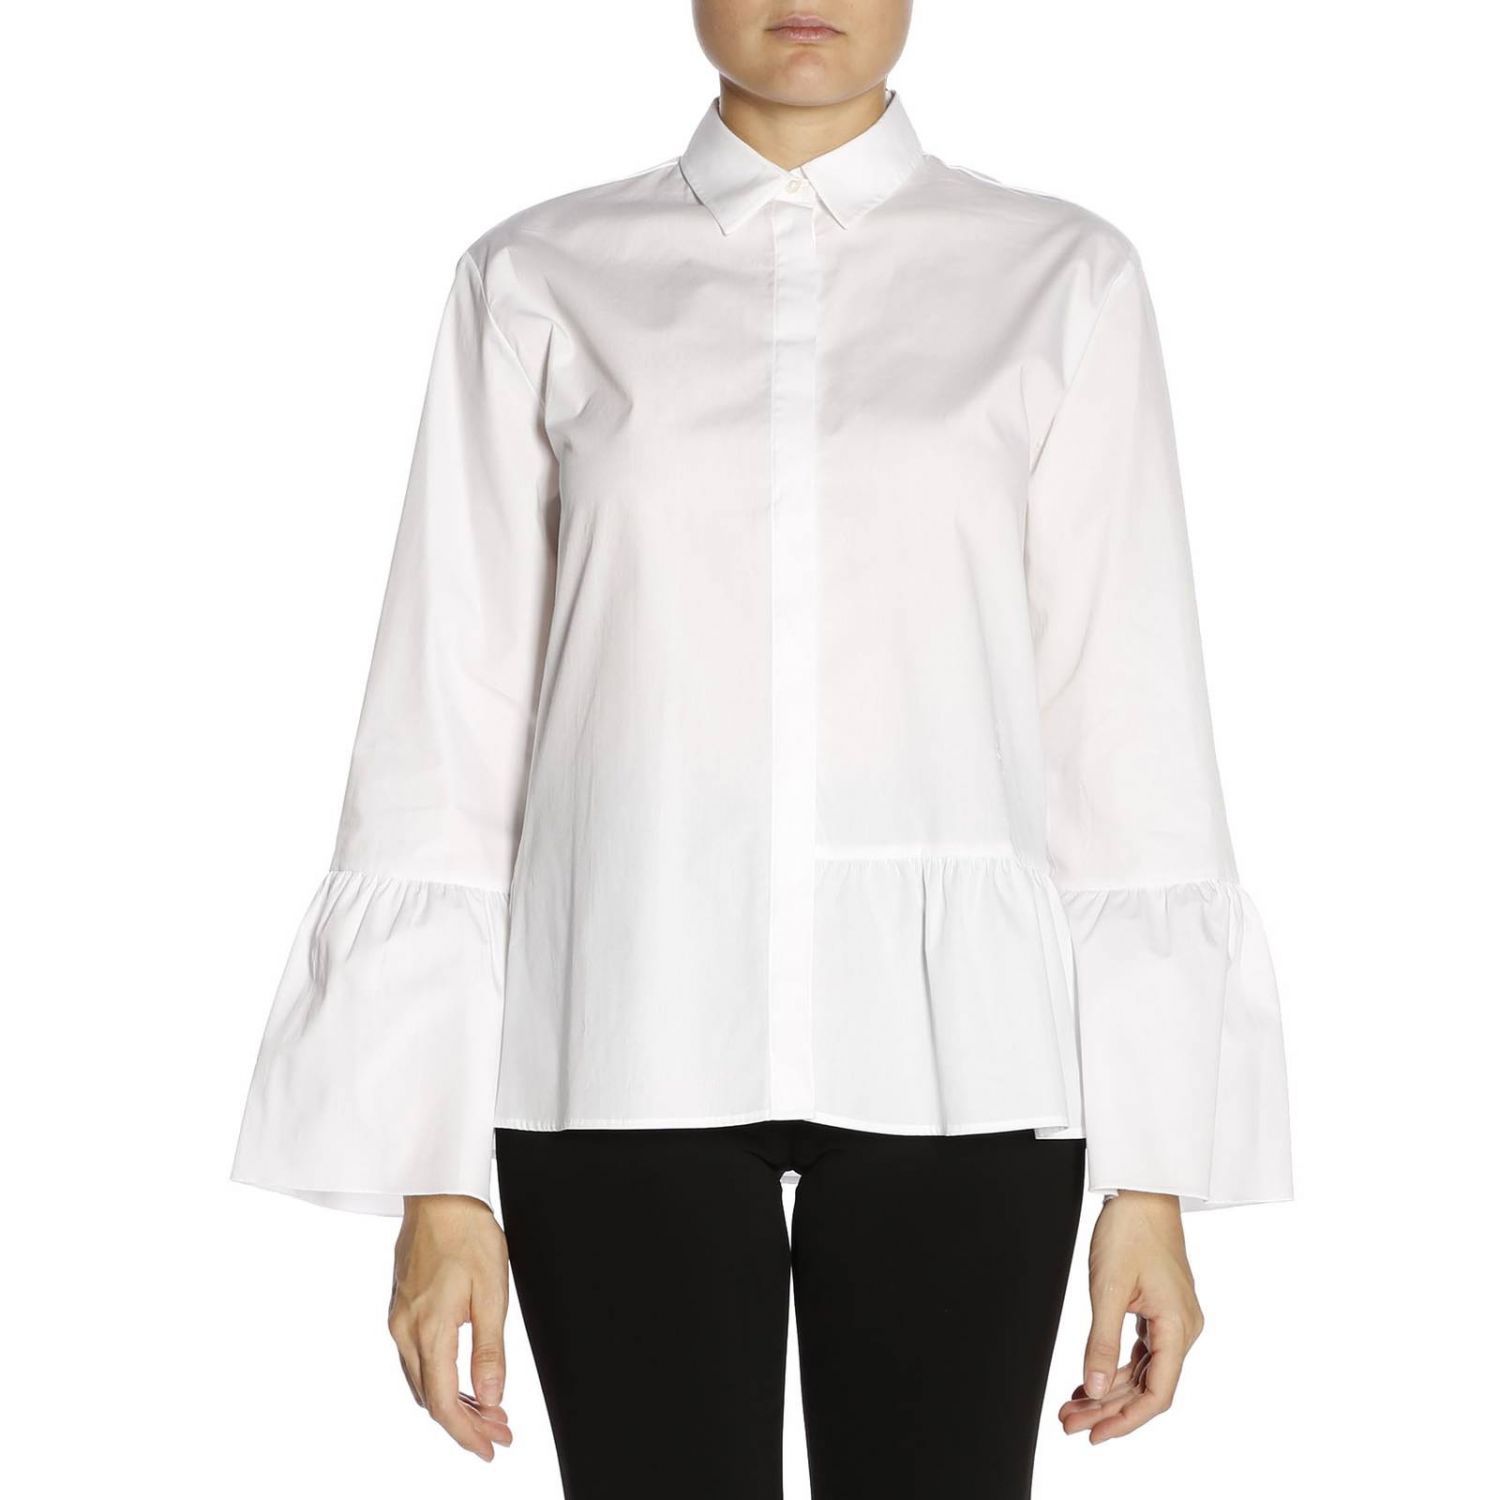 Ice Play Outlet: Shirt women - White | Shirt Ice Play G091 P100 GIGLIO.COM